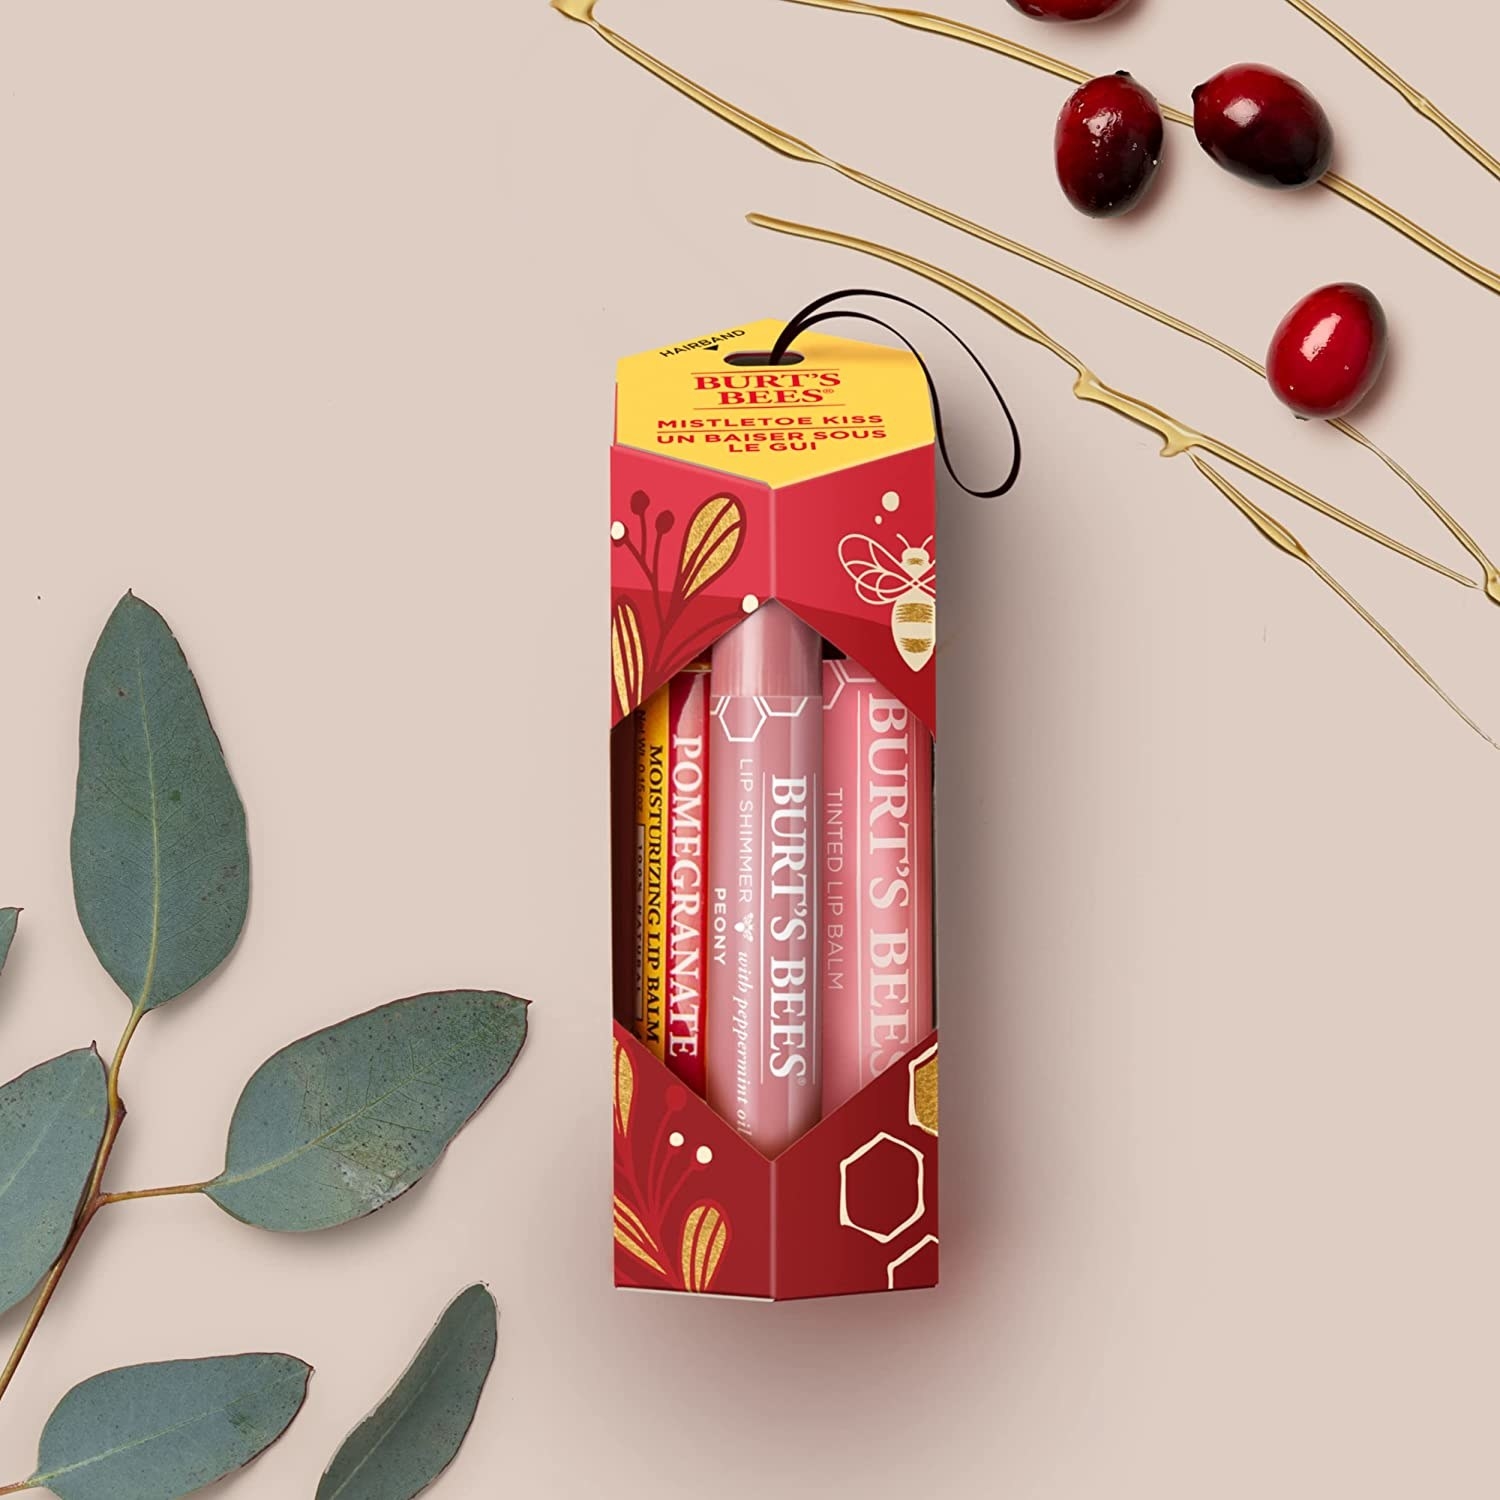 the pack of lip balms beside some leaves